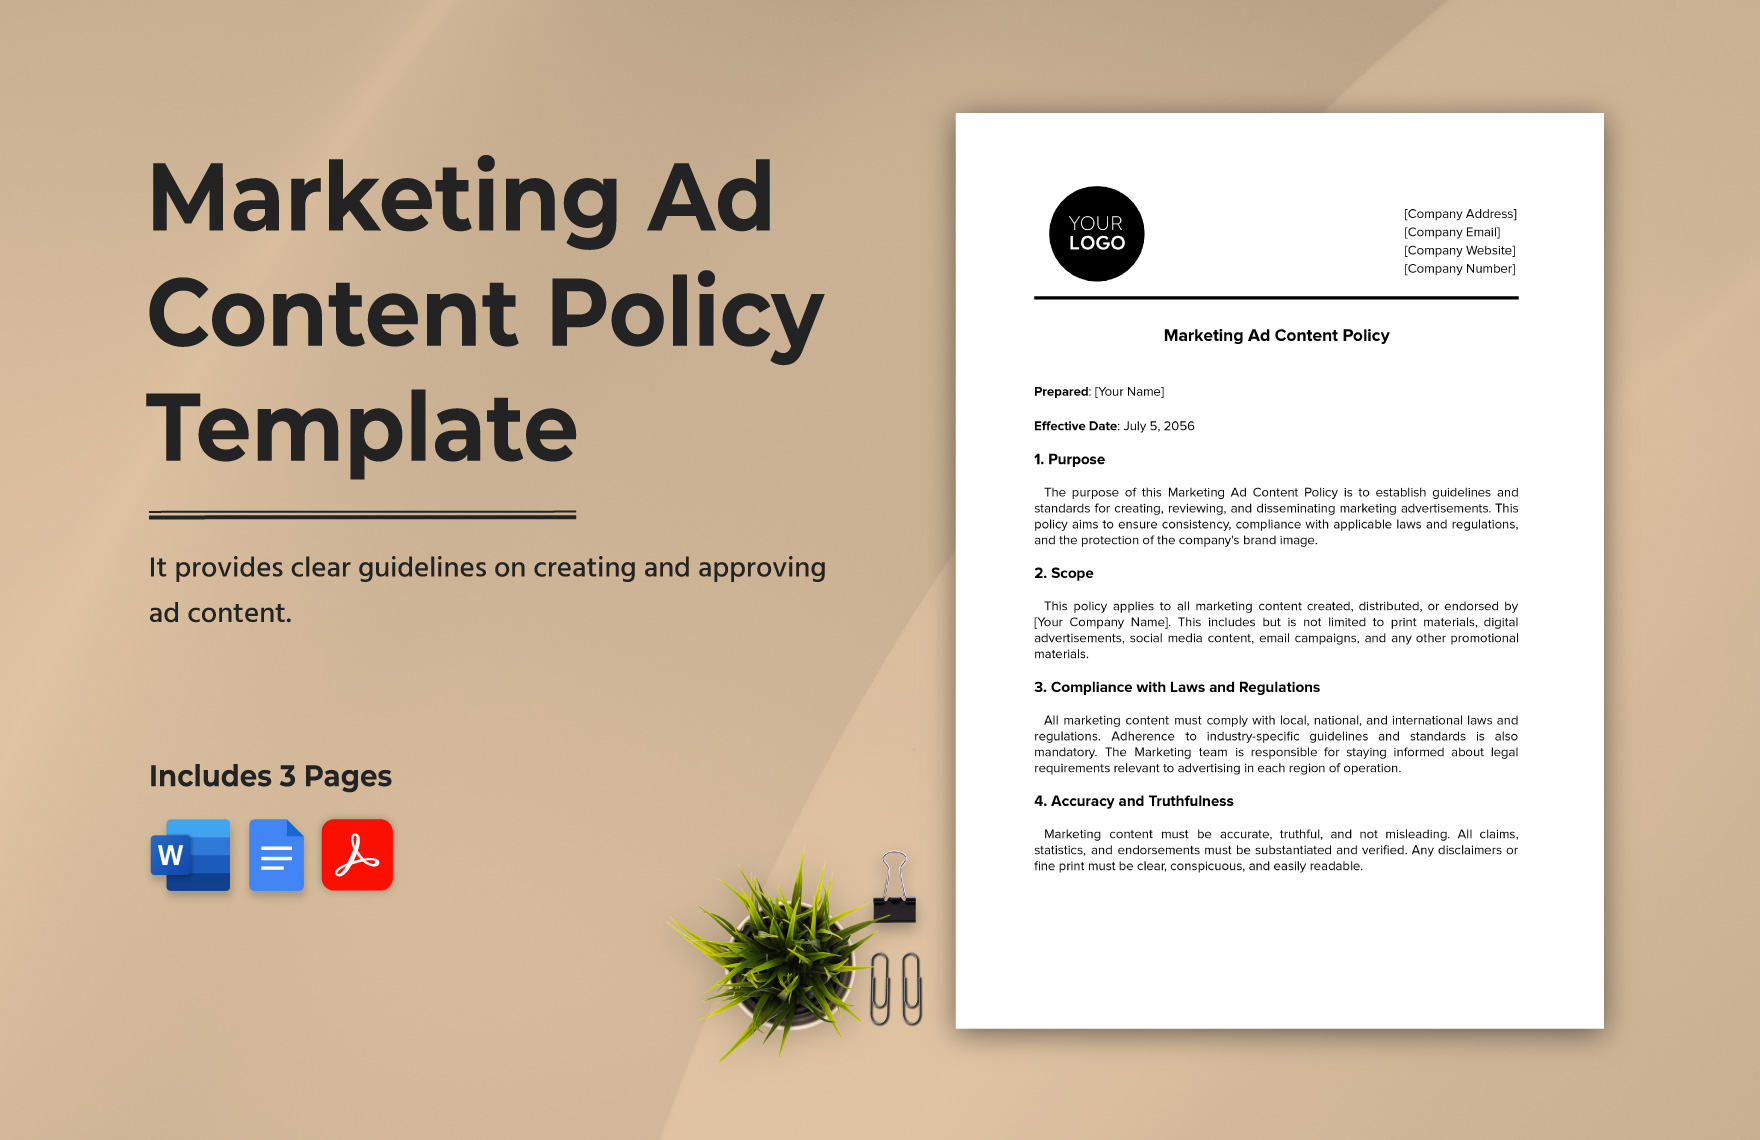 Marketing Ad Content Policy Template